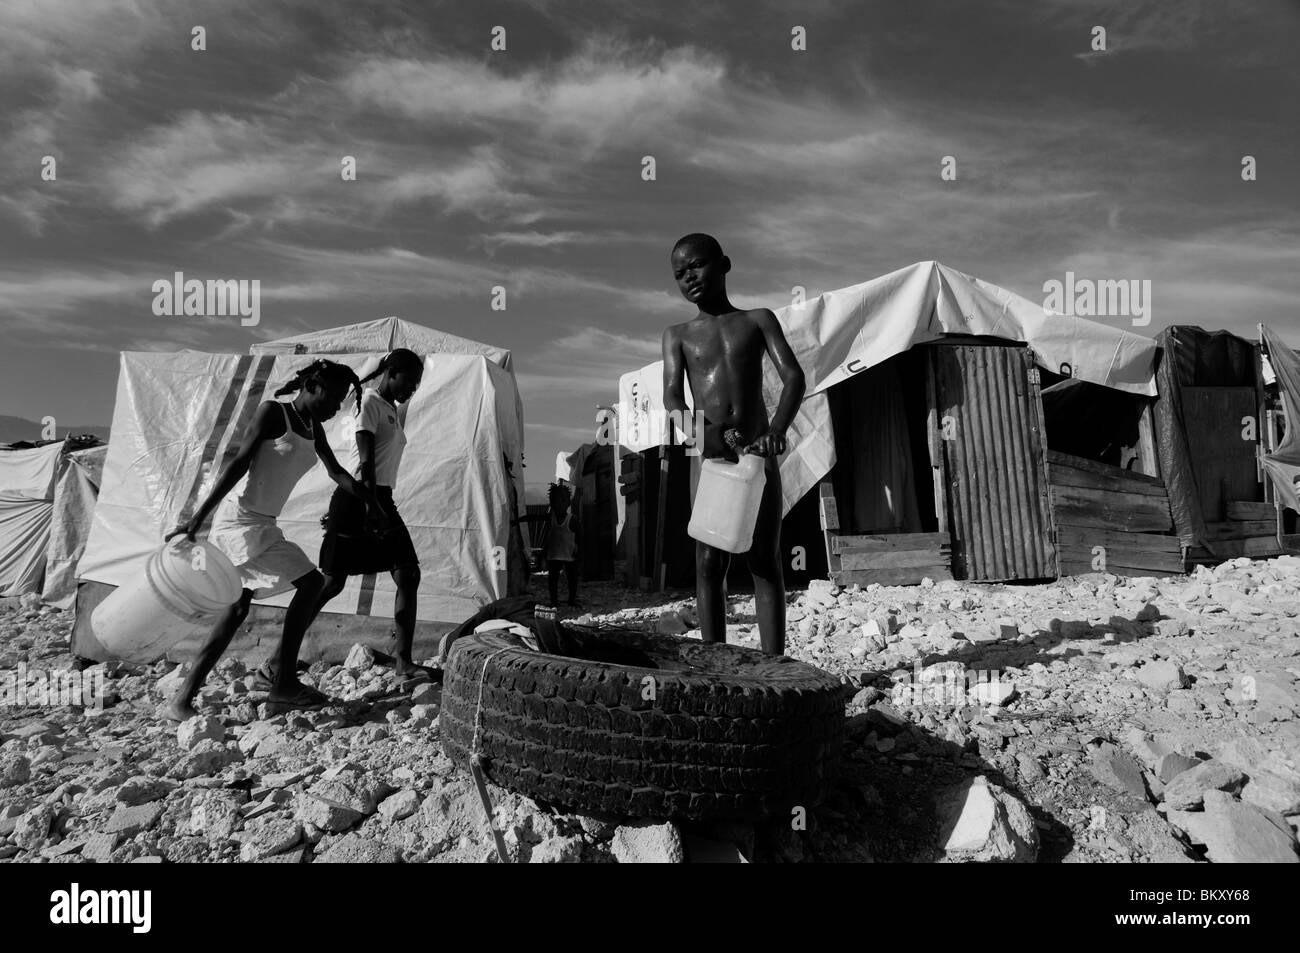 A child stands next to tents made of sheets at a temporary makeshift encampment in Port-au-Prince after a 7.0 magnitude earthquake struck Haiti on 12 January 2010 Stock Photo